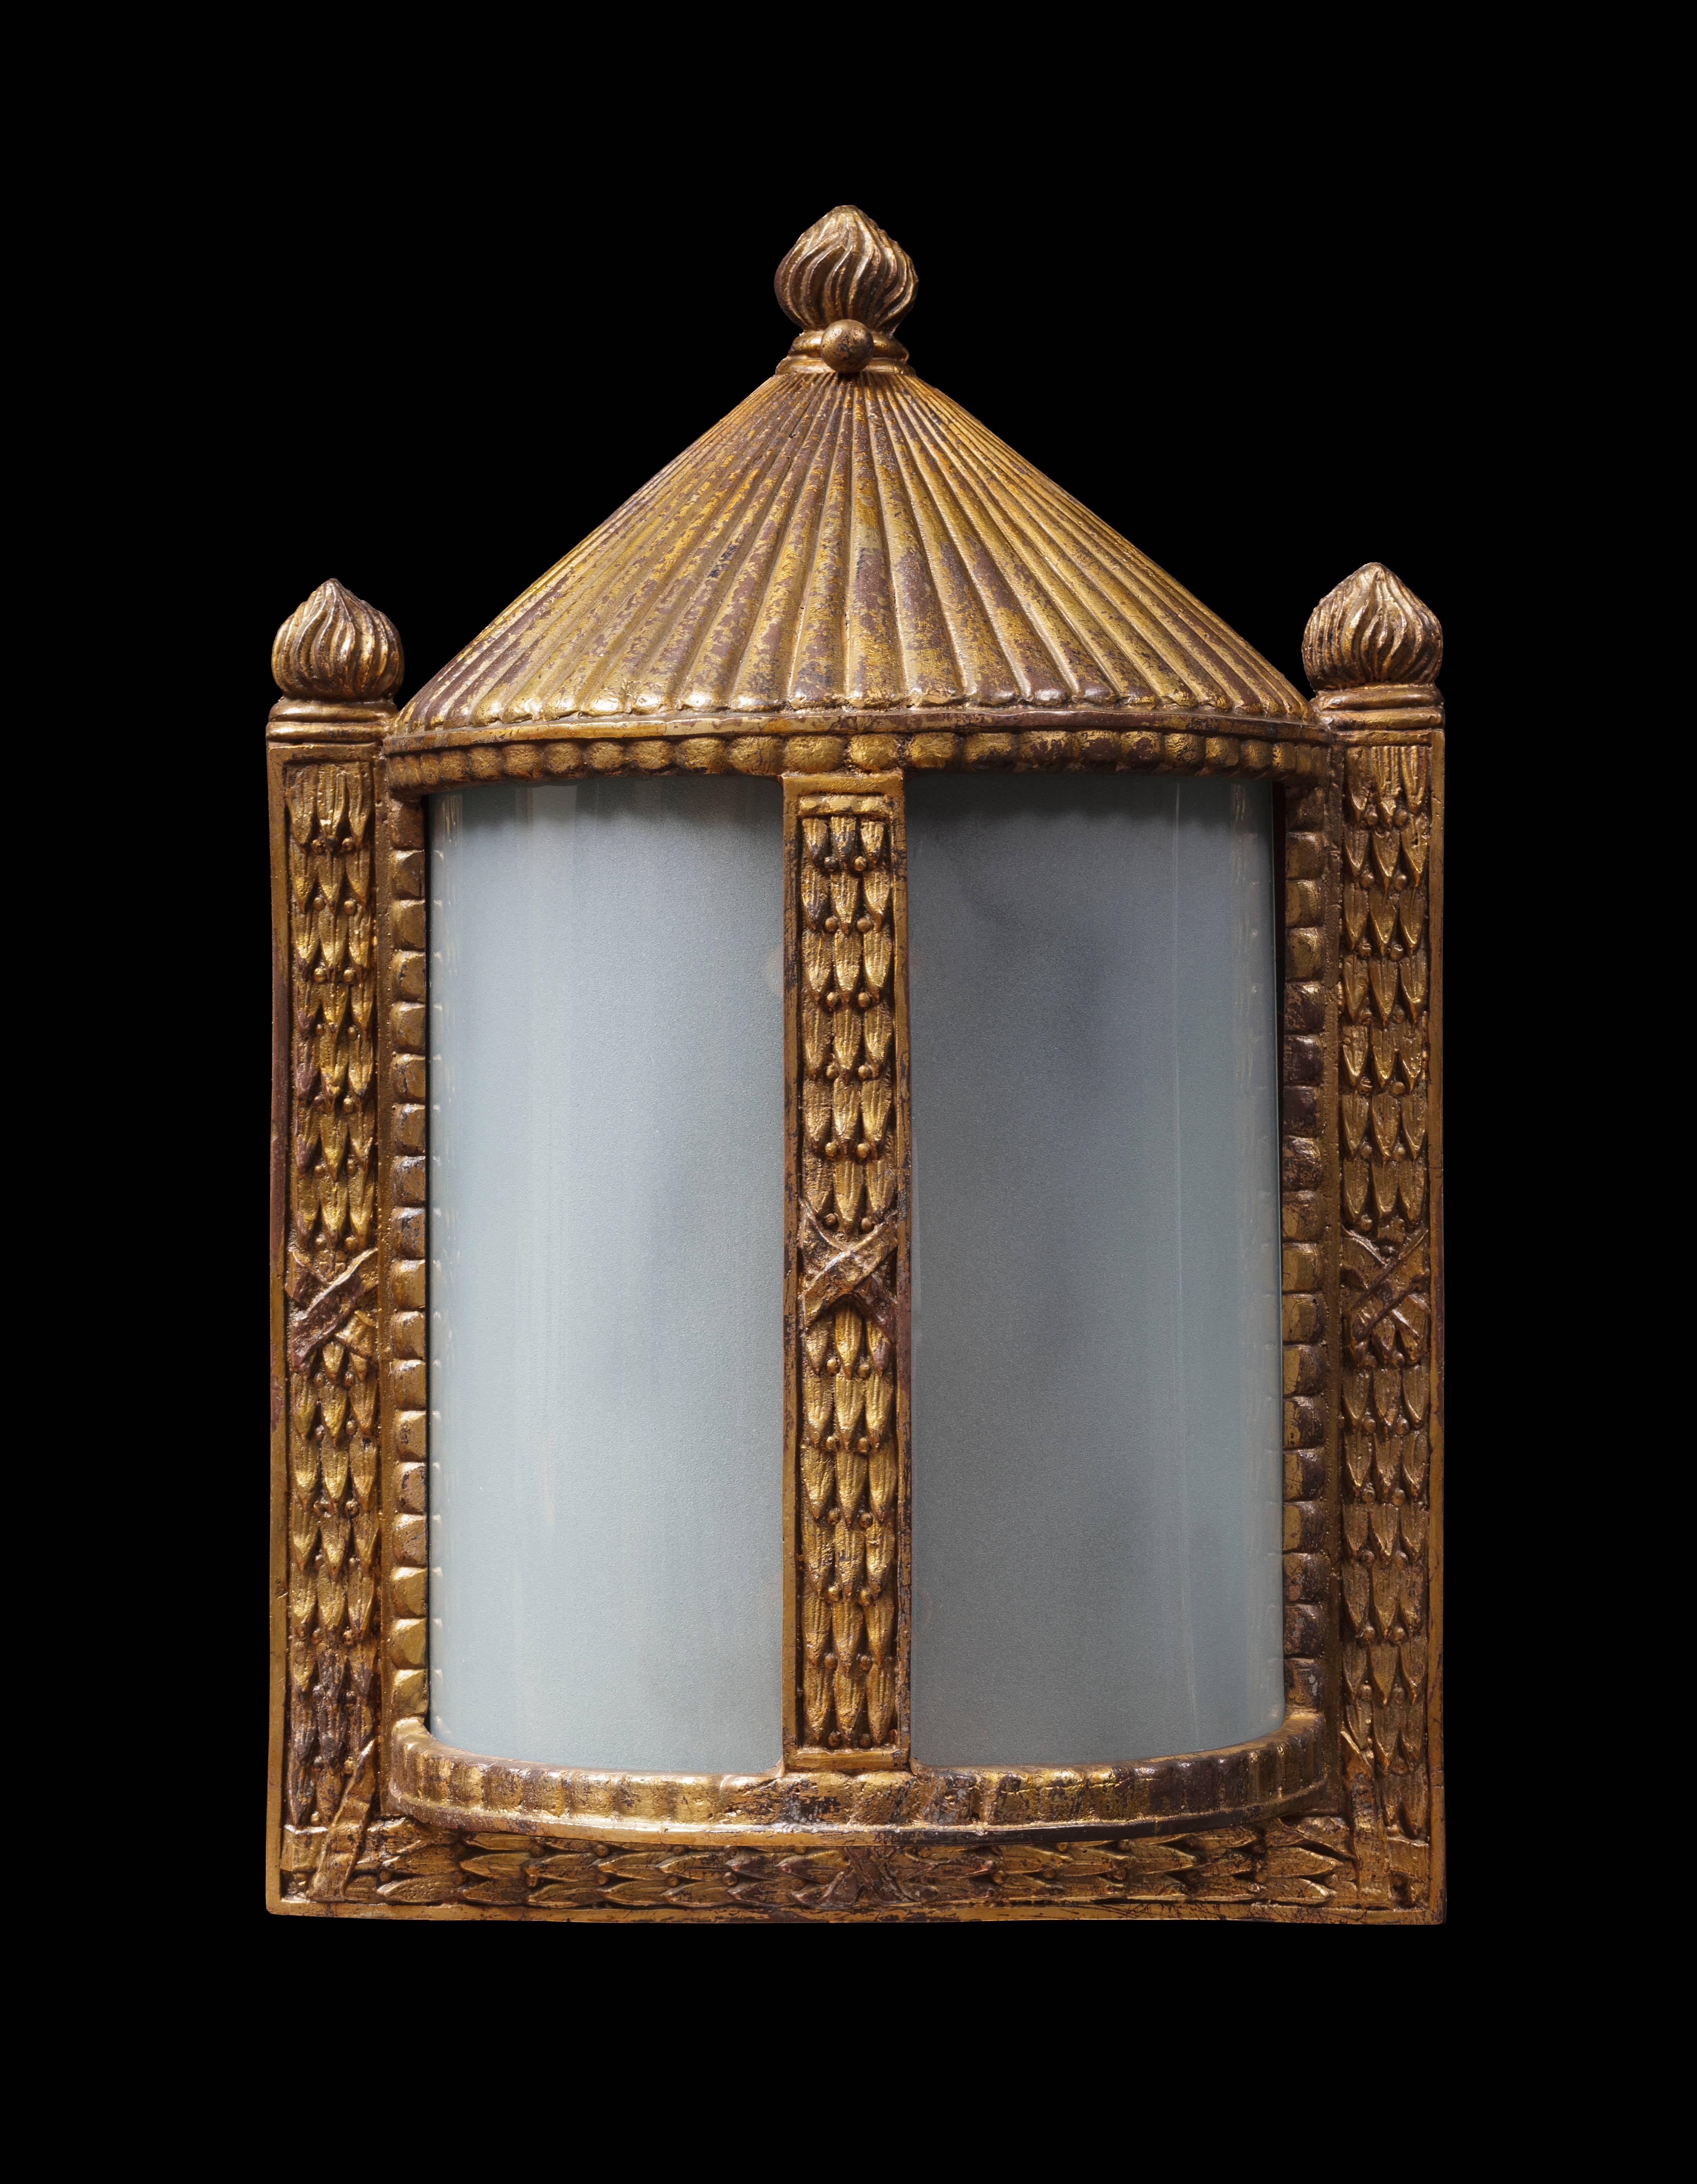 Drawing on the decorative style of late the 19th century, this wall lantern of semi cylindrical form is framed with moulded bronze fasces, a tent-like top and three stylised flames.